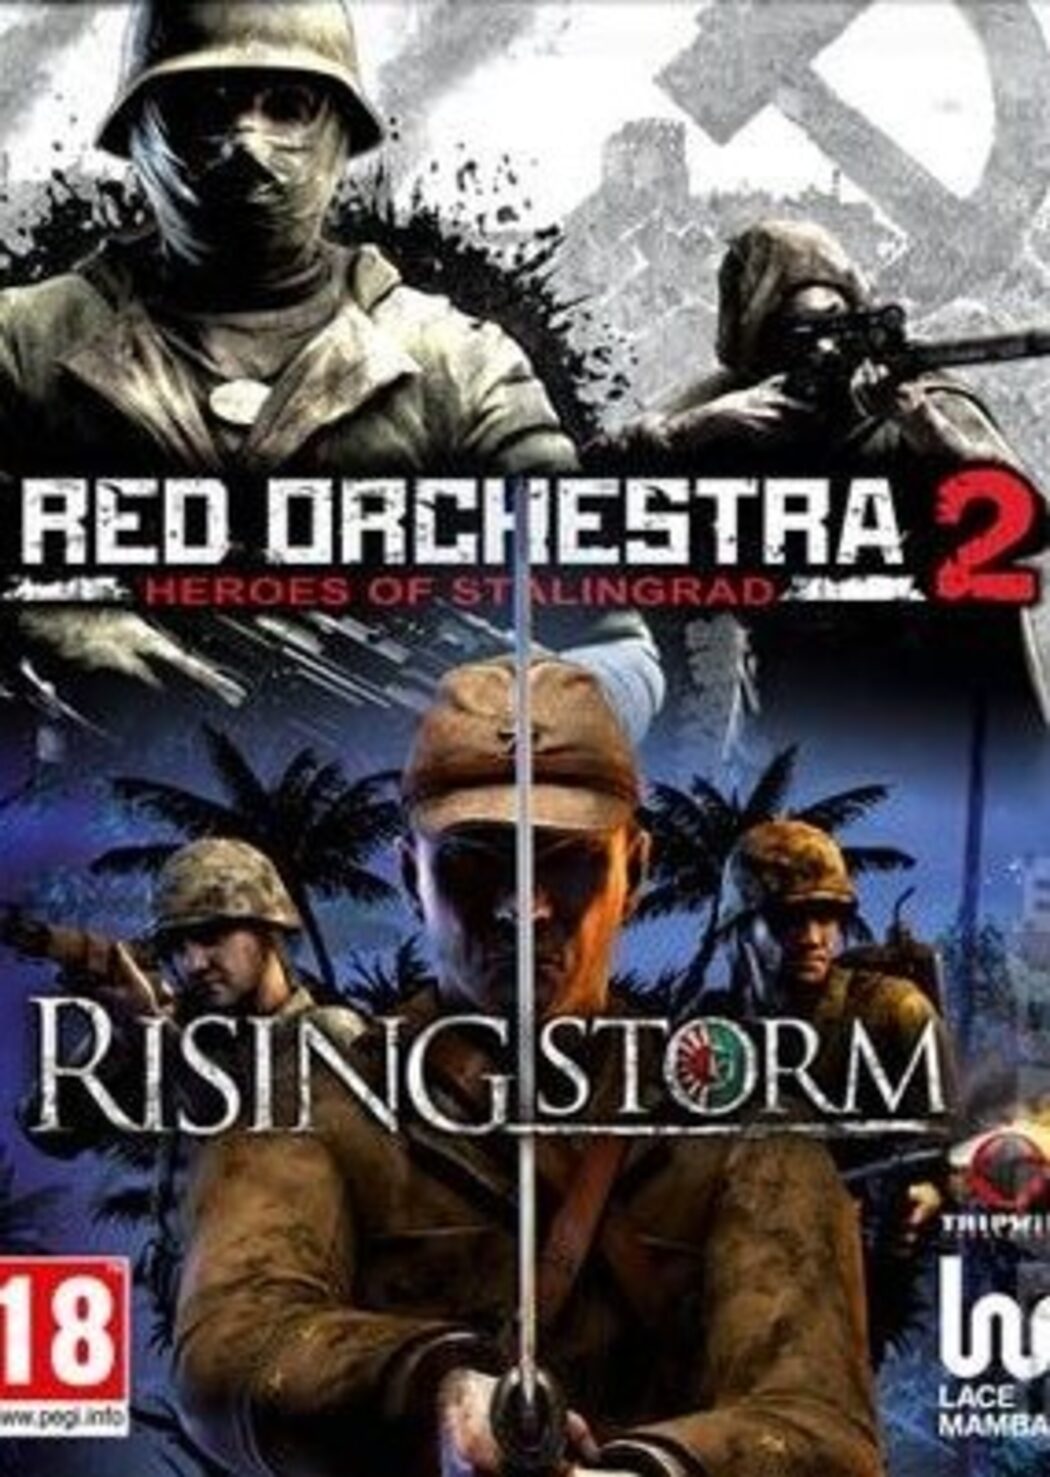 red orchestra 2 heroes of stalingrad with rising storm pass